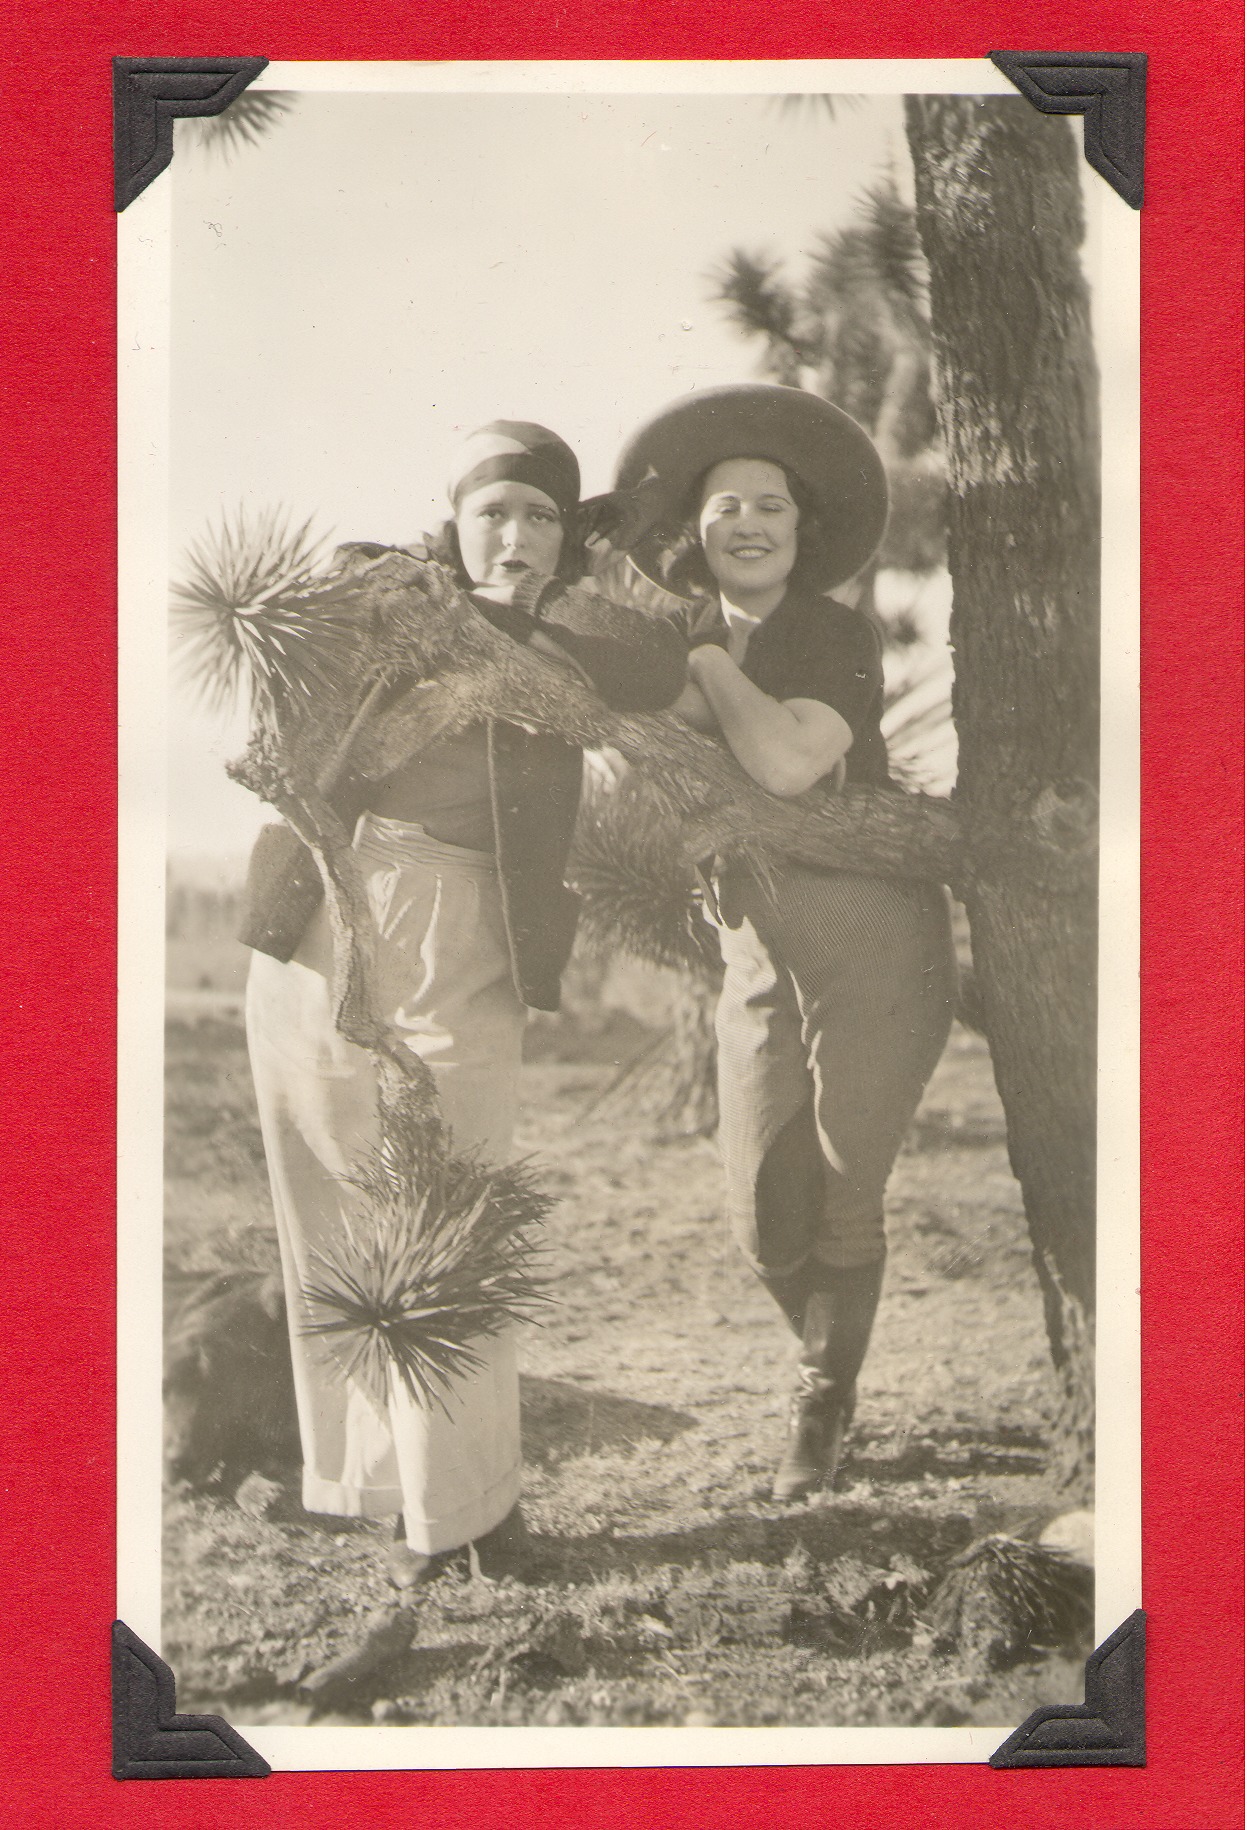 Clara Bow Bell (left) with Marion Lewyn: photographic print